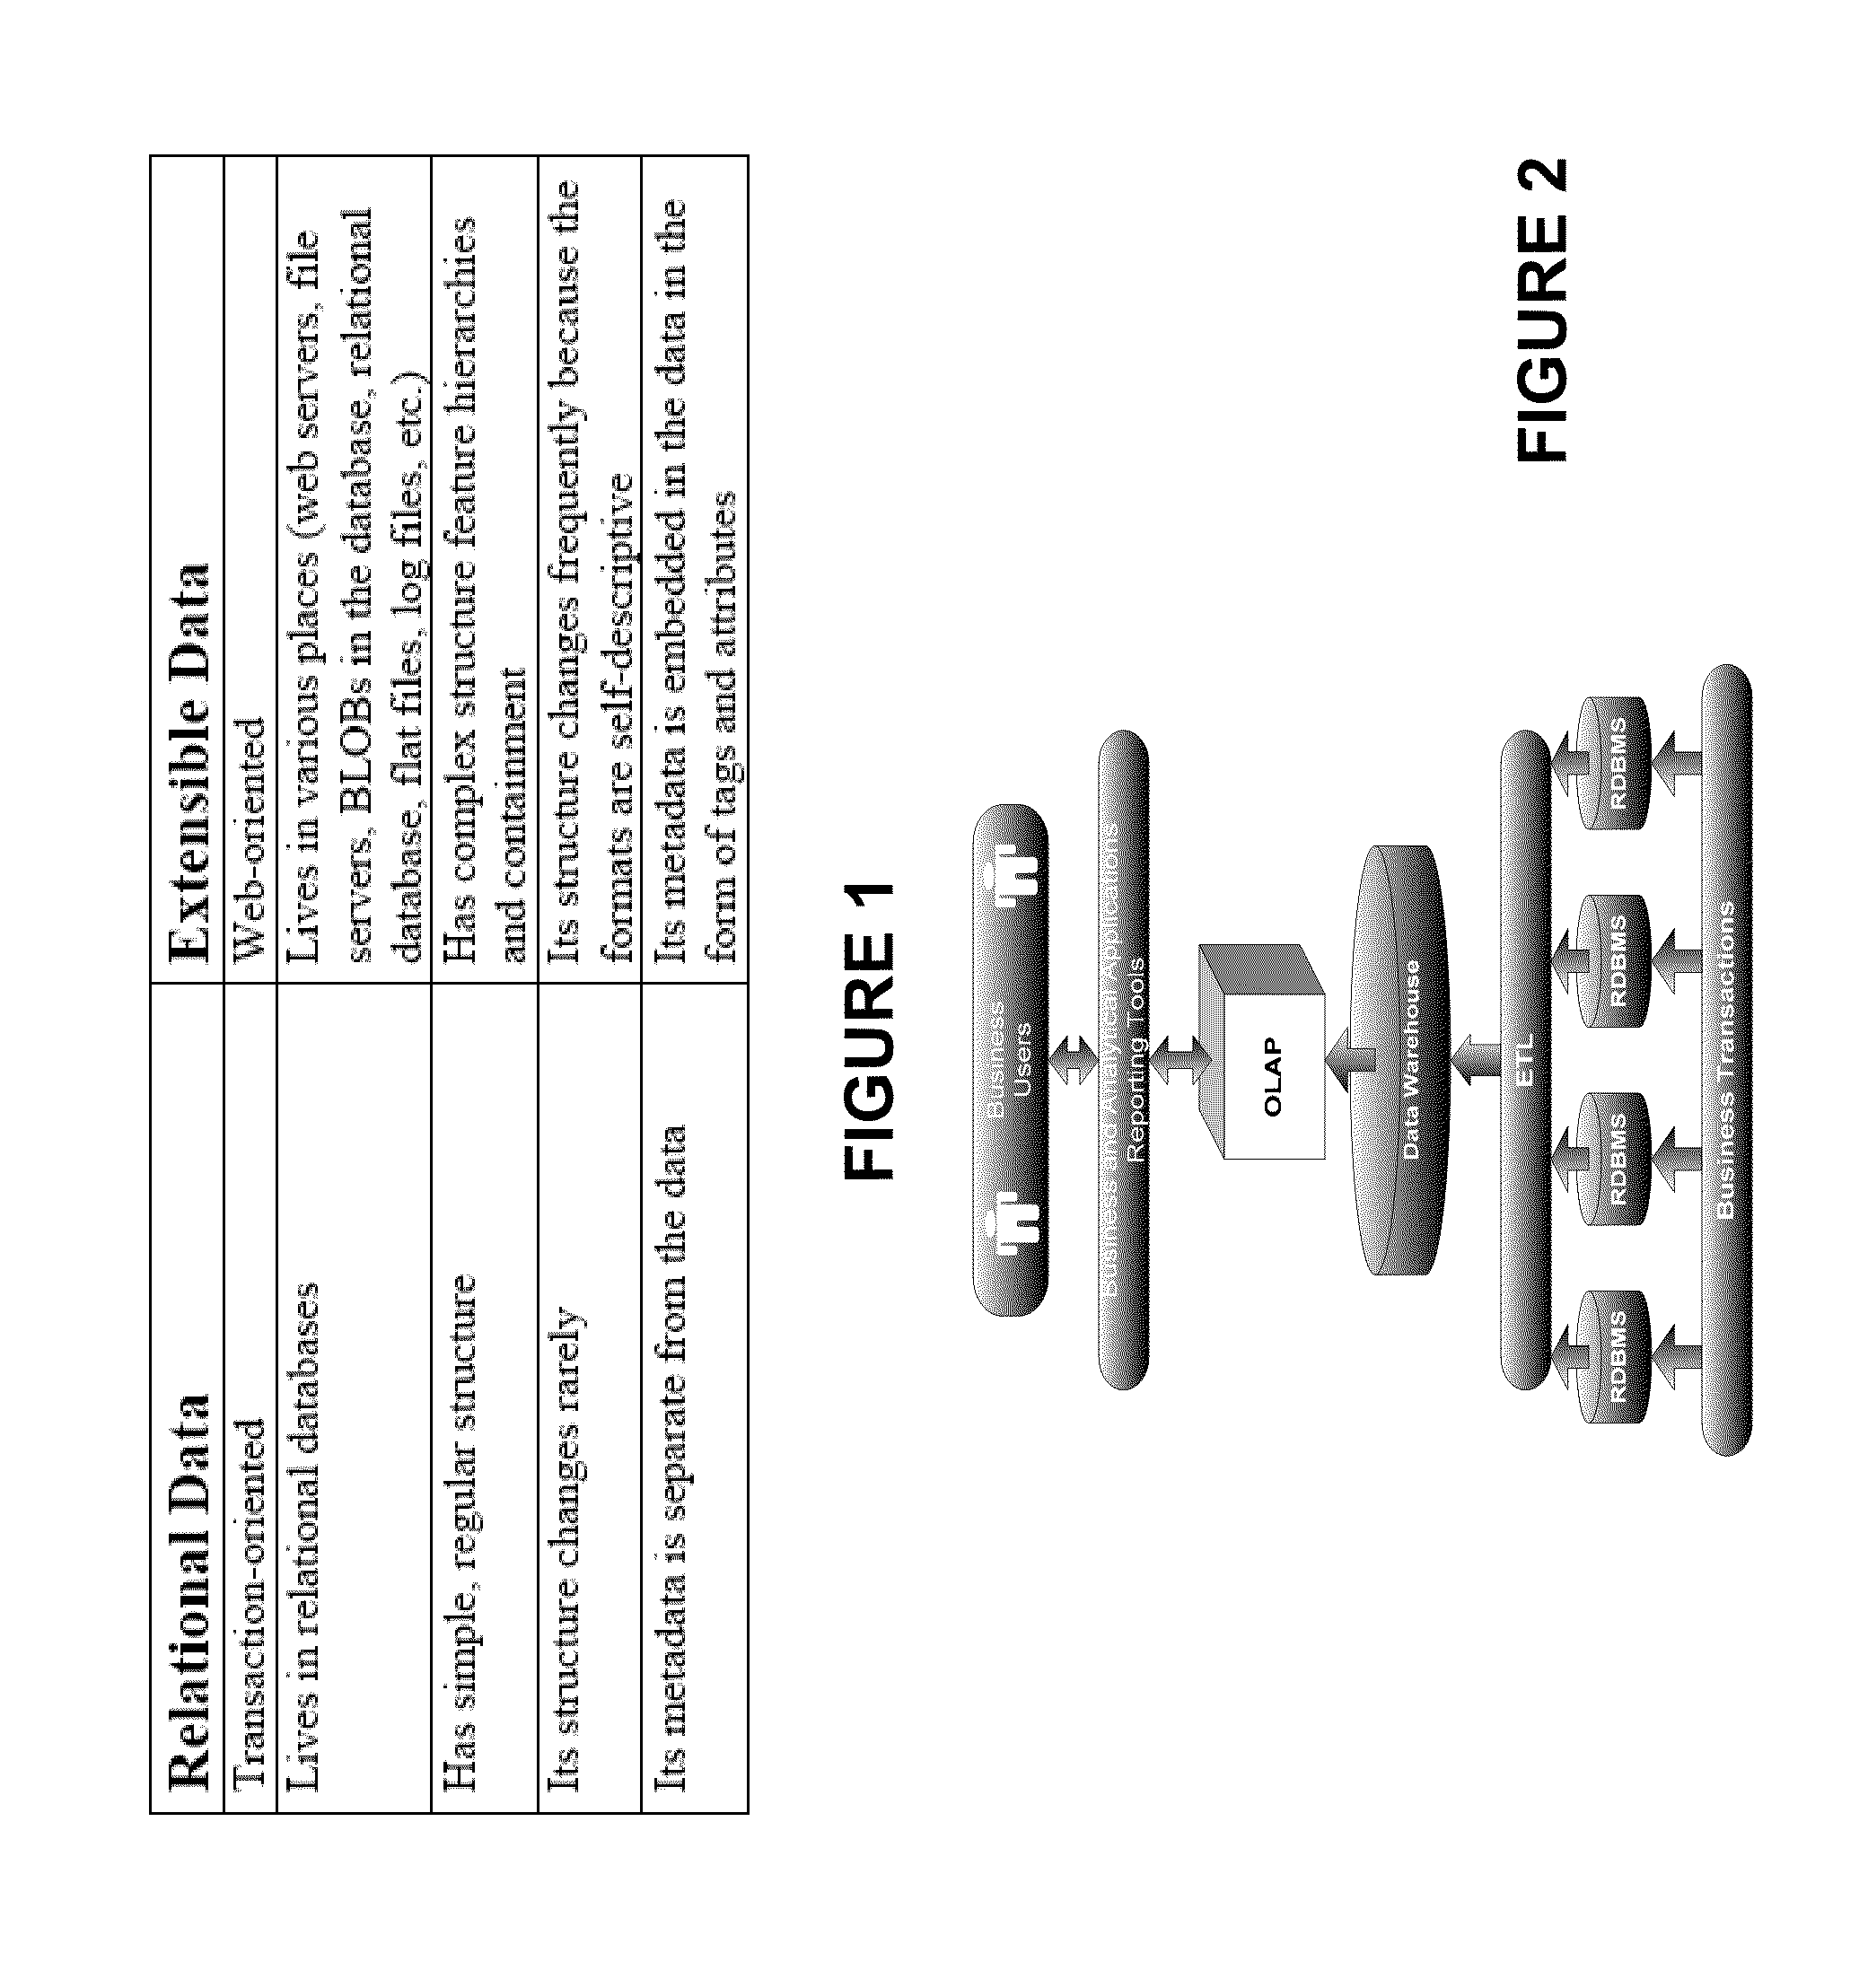 System and Method for analyzing and reporting extensible data from multiple sources in multiple formats